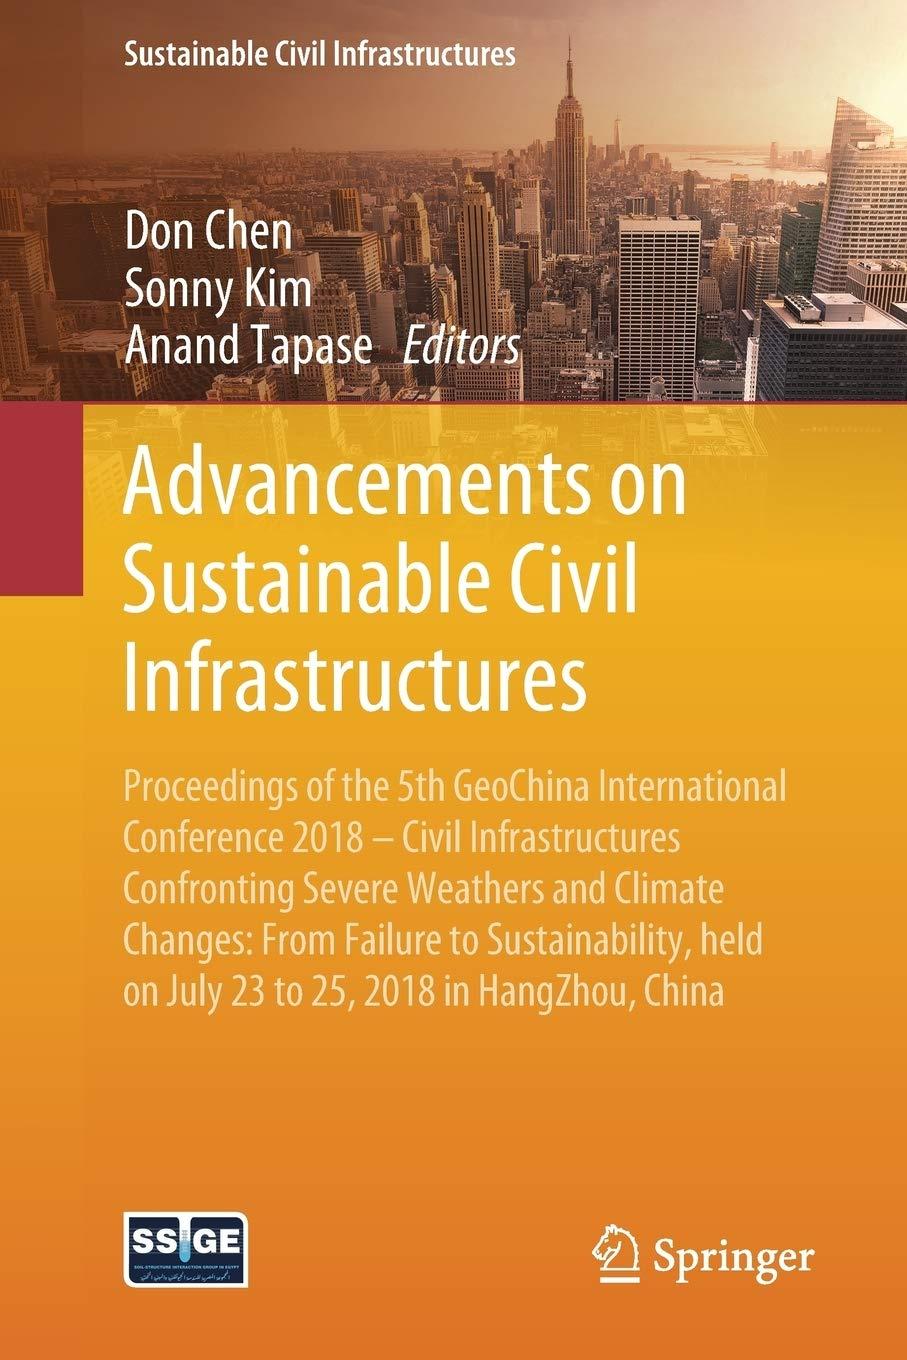 advancements on sustainable civil infrastructures proceedings of the 5th geochina international conference